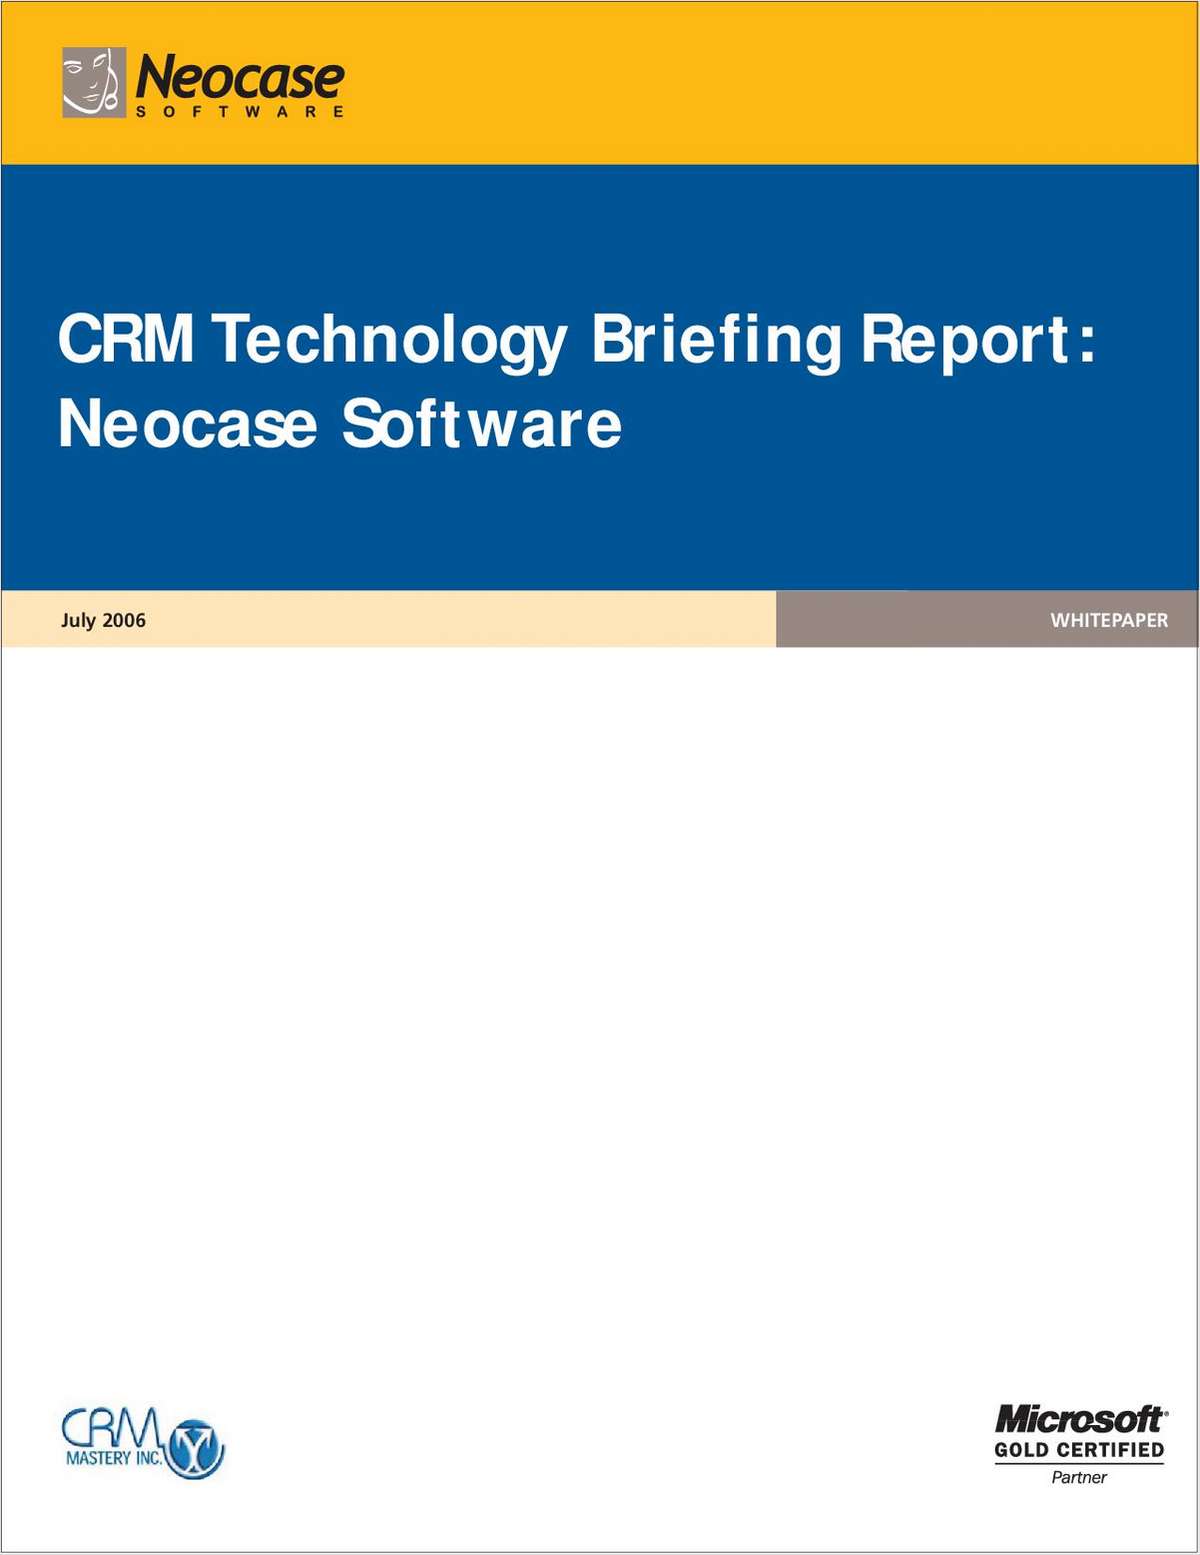 CRM Technology Briefing Report: Neocase Software for Customer Support